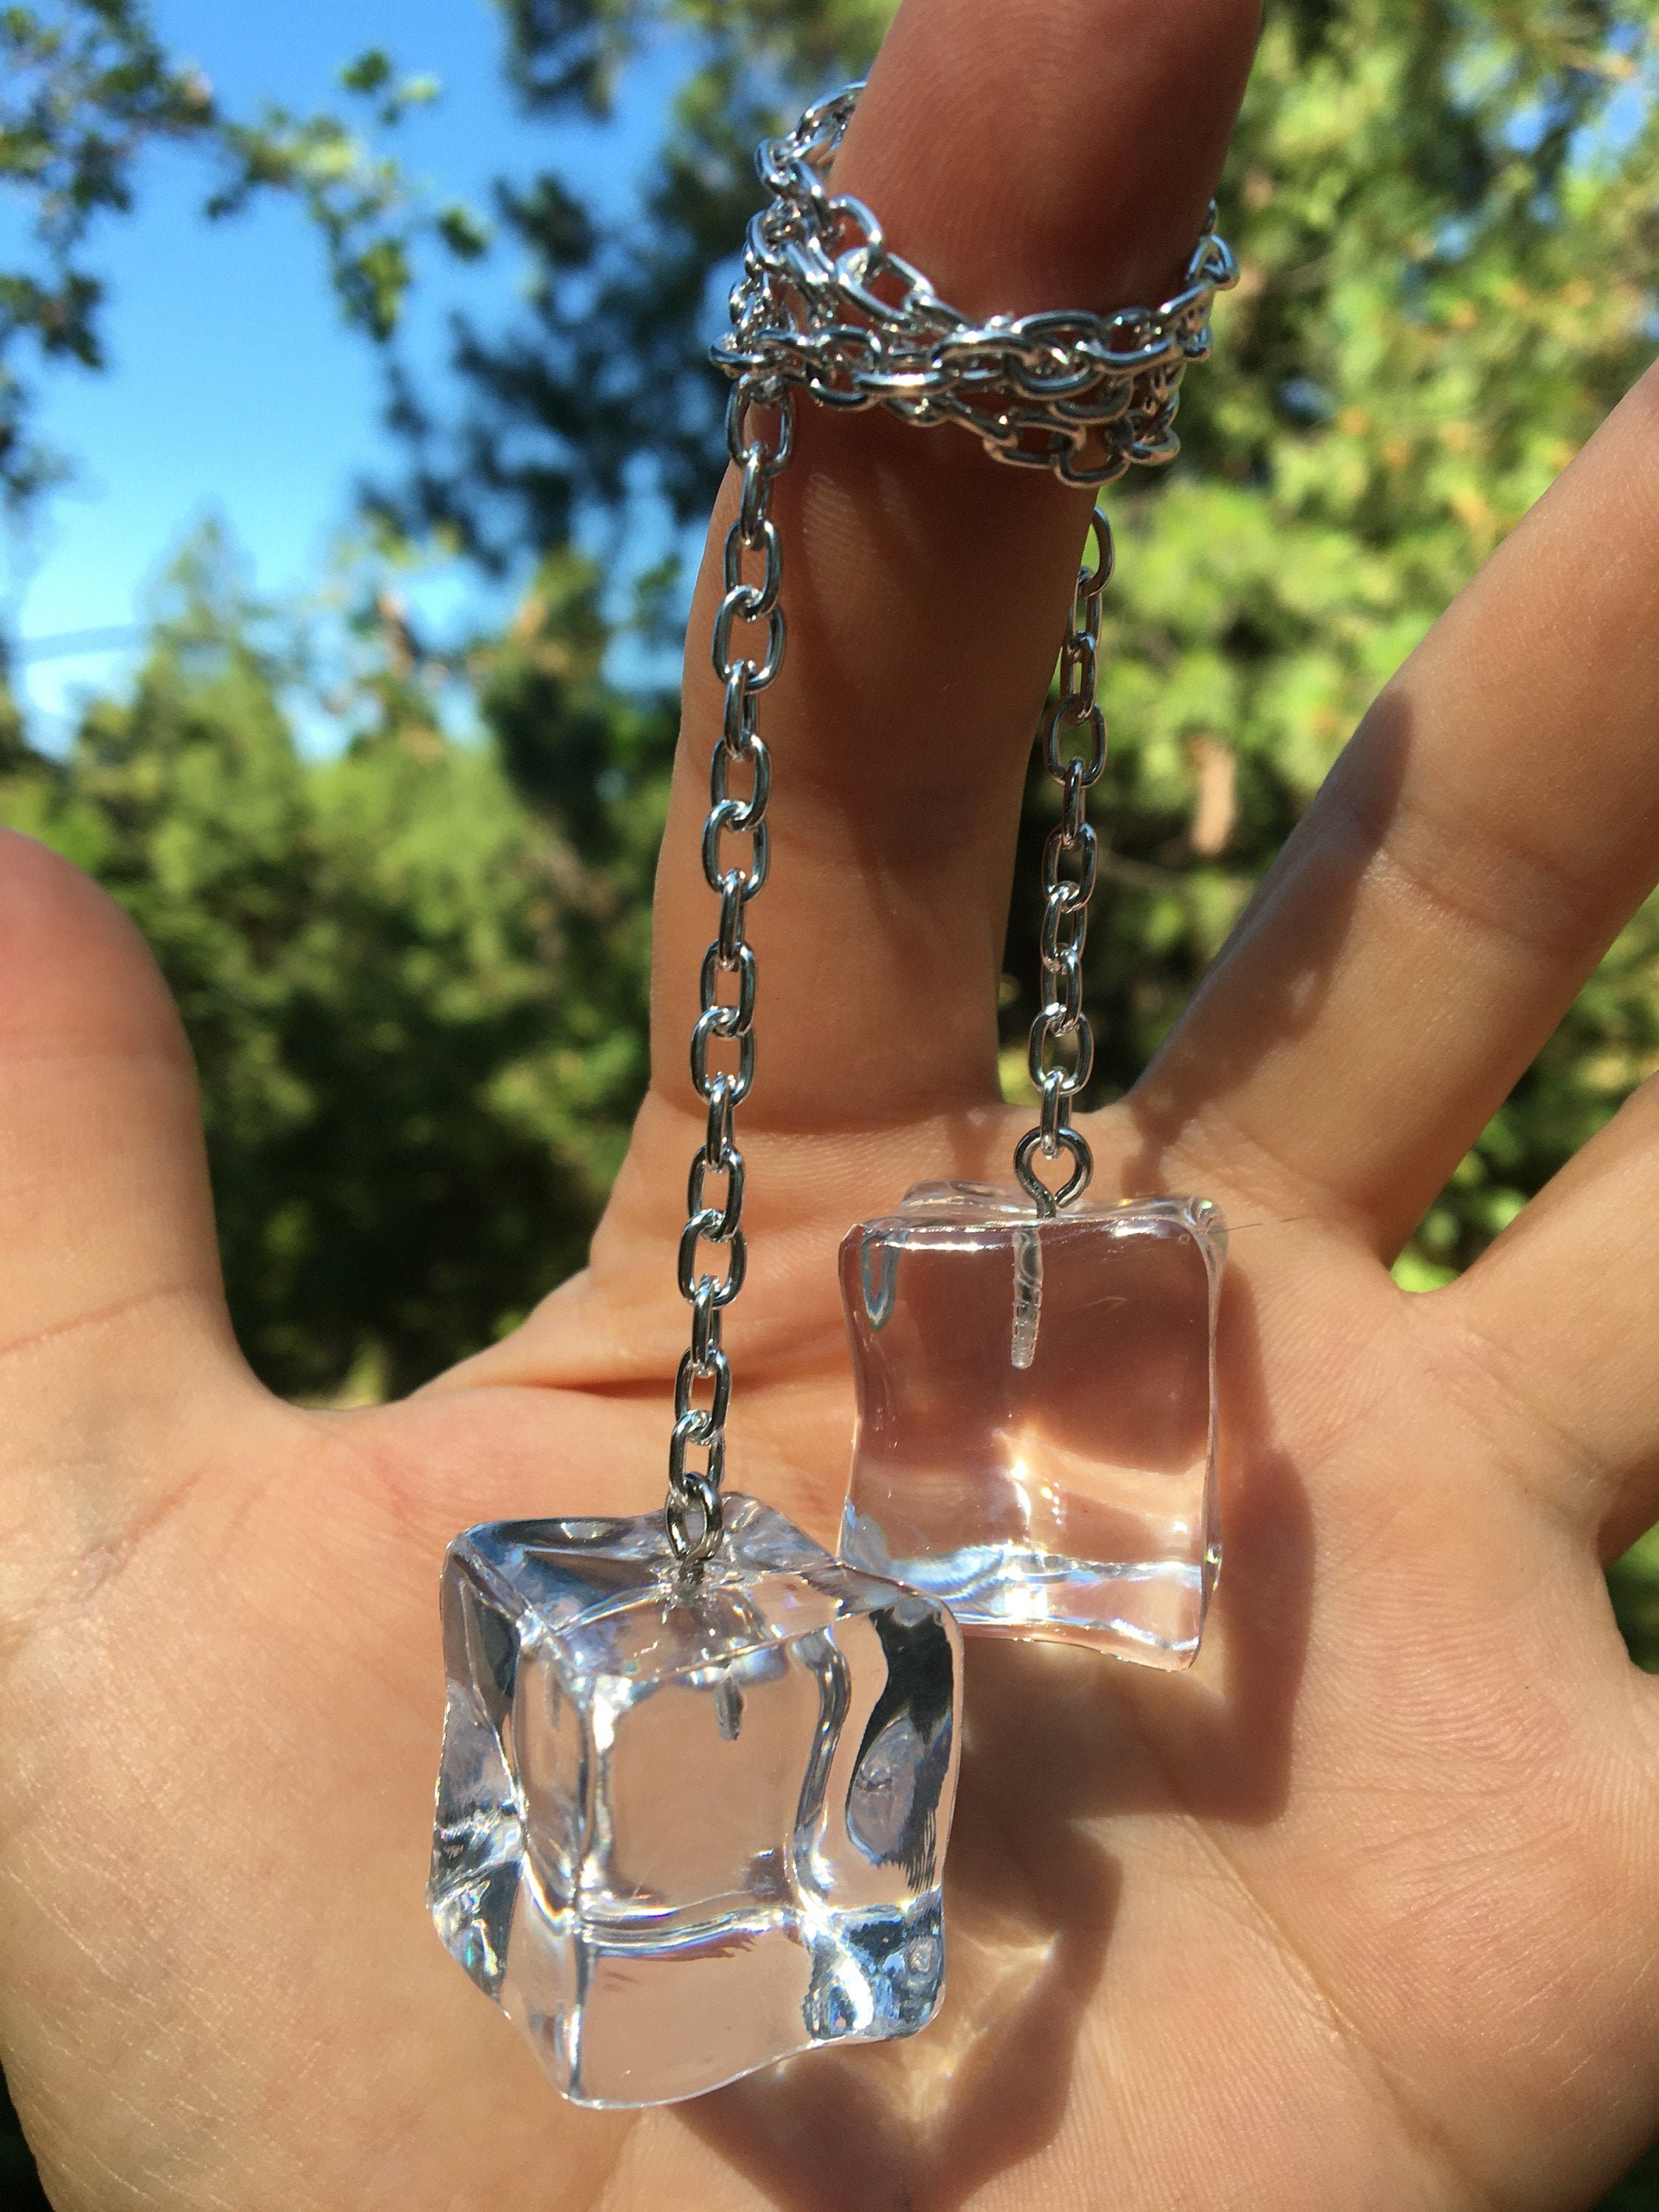 OHM Vacation Drinks, with an Ice Cube – Trudy's charms 'n beads